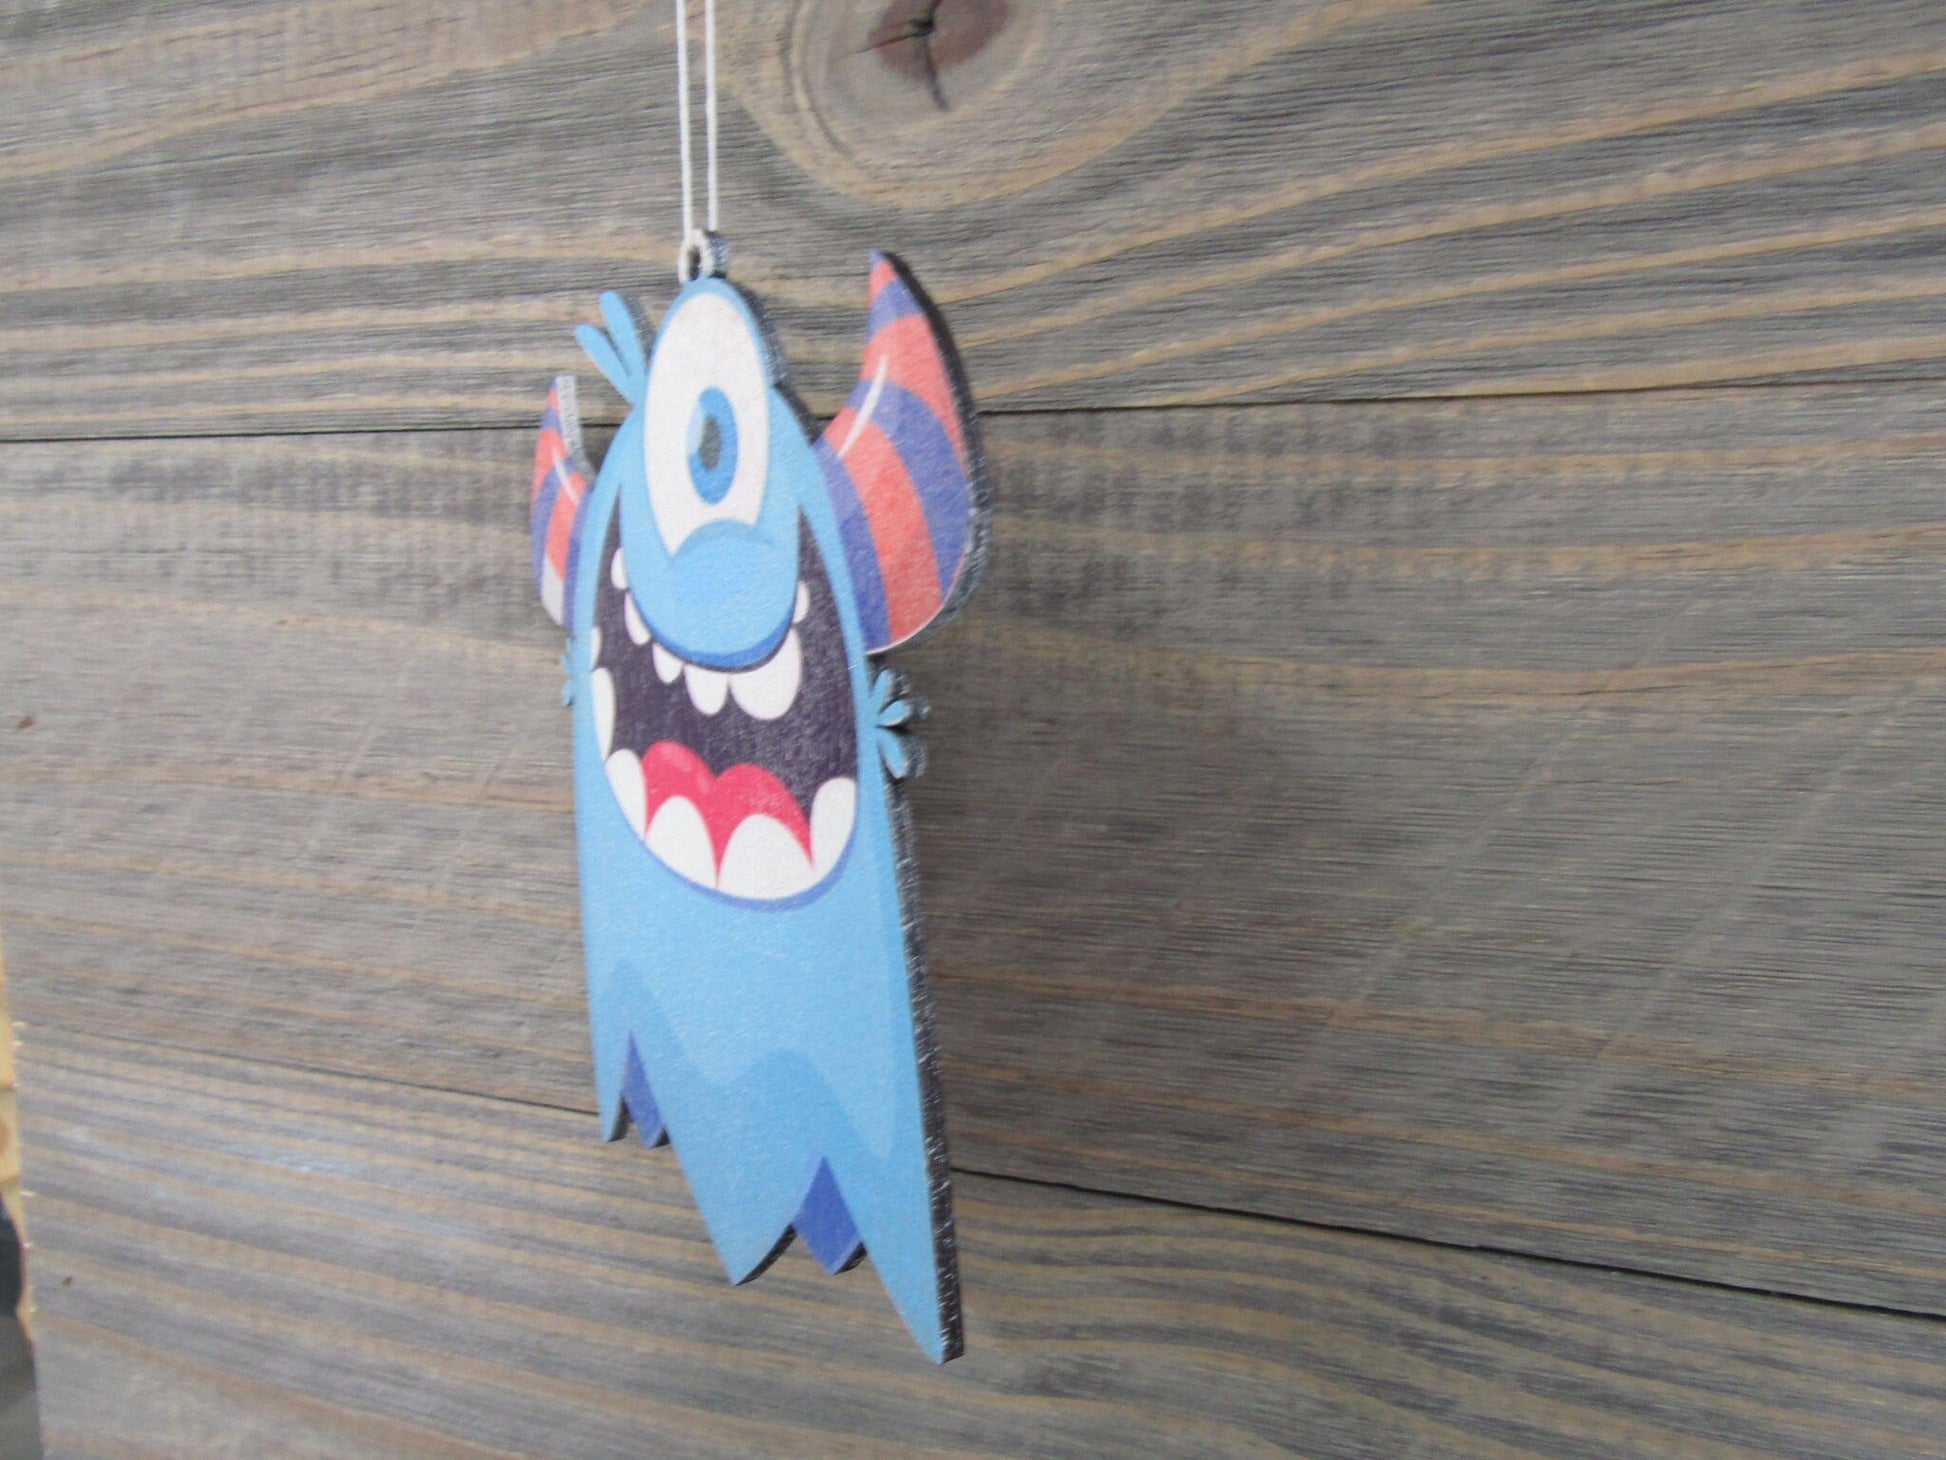 Monsters Cute Monsters Little Party Decor Ornaments Halloween Fun Colorful Set Of 4 Goofy Silly Boys Birthday Room Decor Wood Hanging Bundle